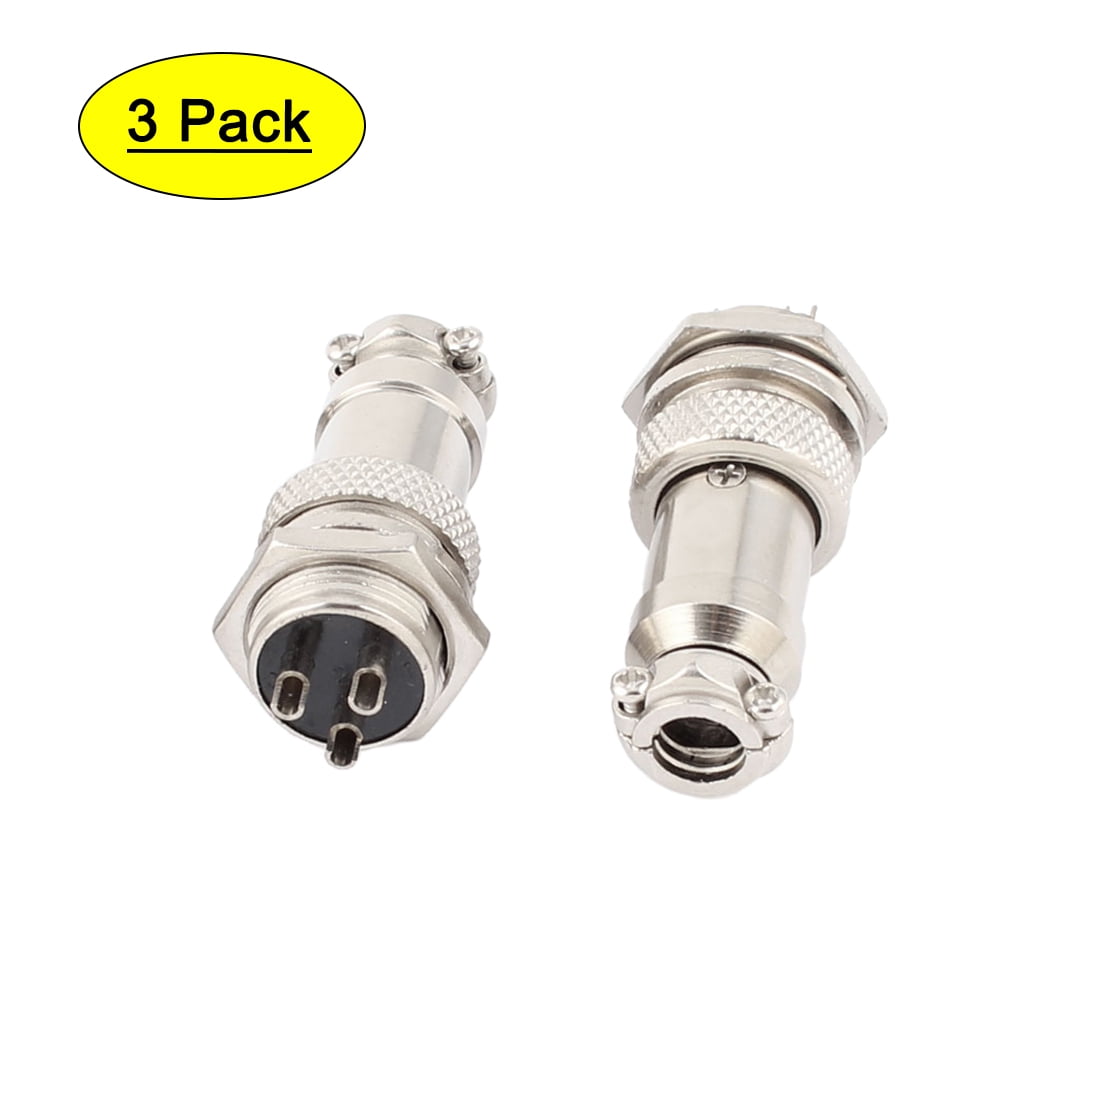 5 × Sets Aviation Plug 3-Pin 16mm GX16-3 Male and Female Panel Metal Connector